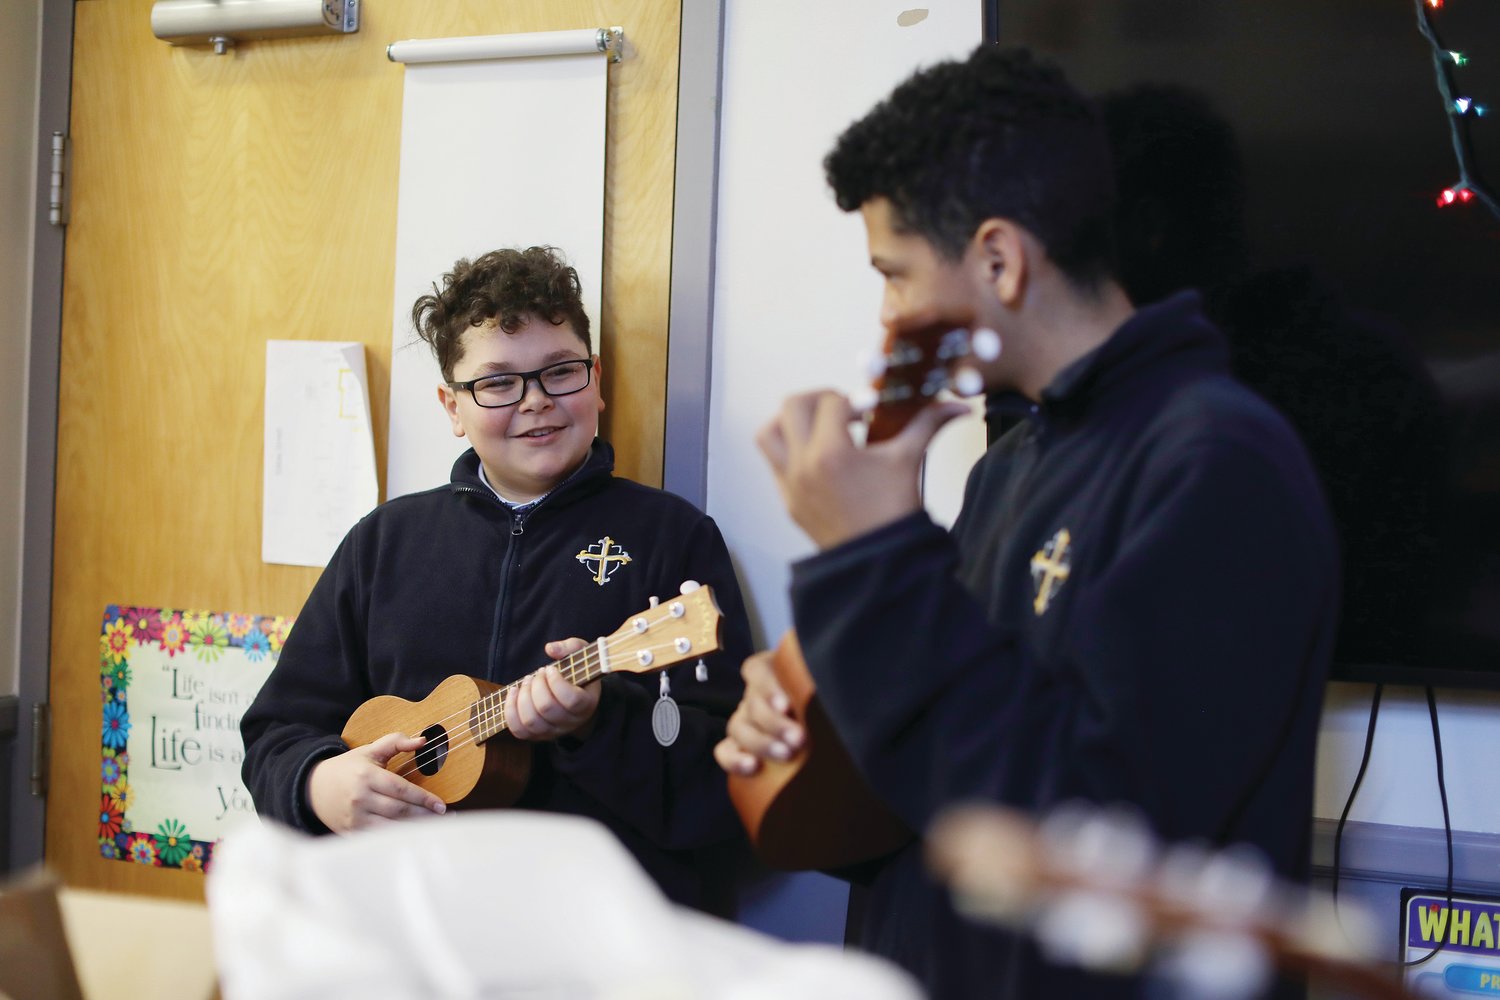 Students from St. Pius V and Sacred Heart schools enjoy their new ukuleles donated by McVinney Auditorium.